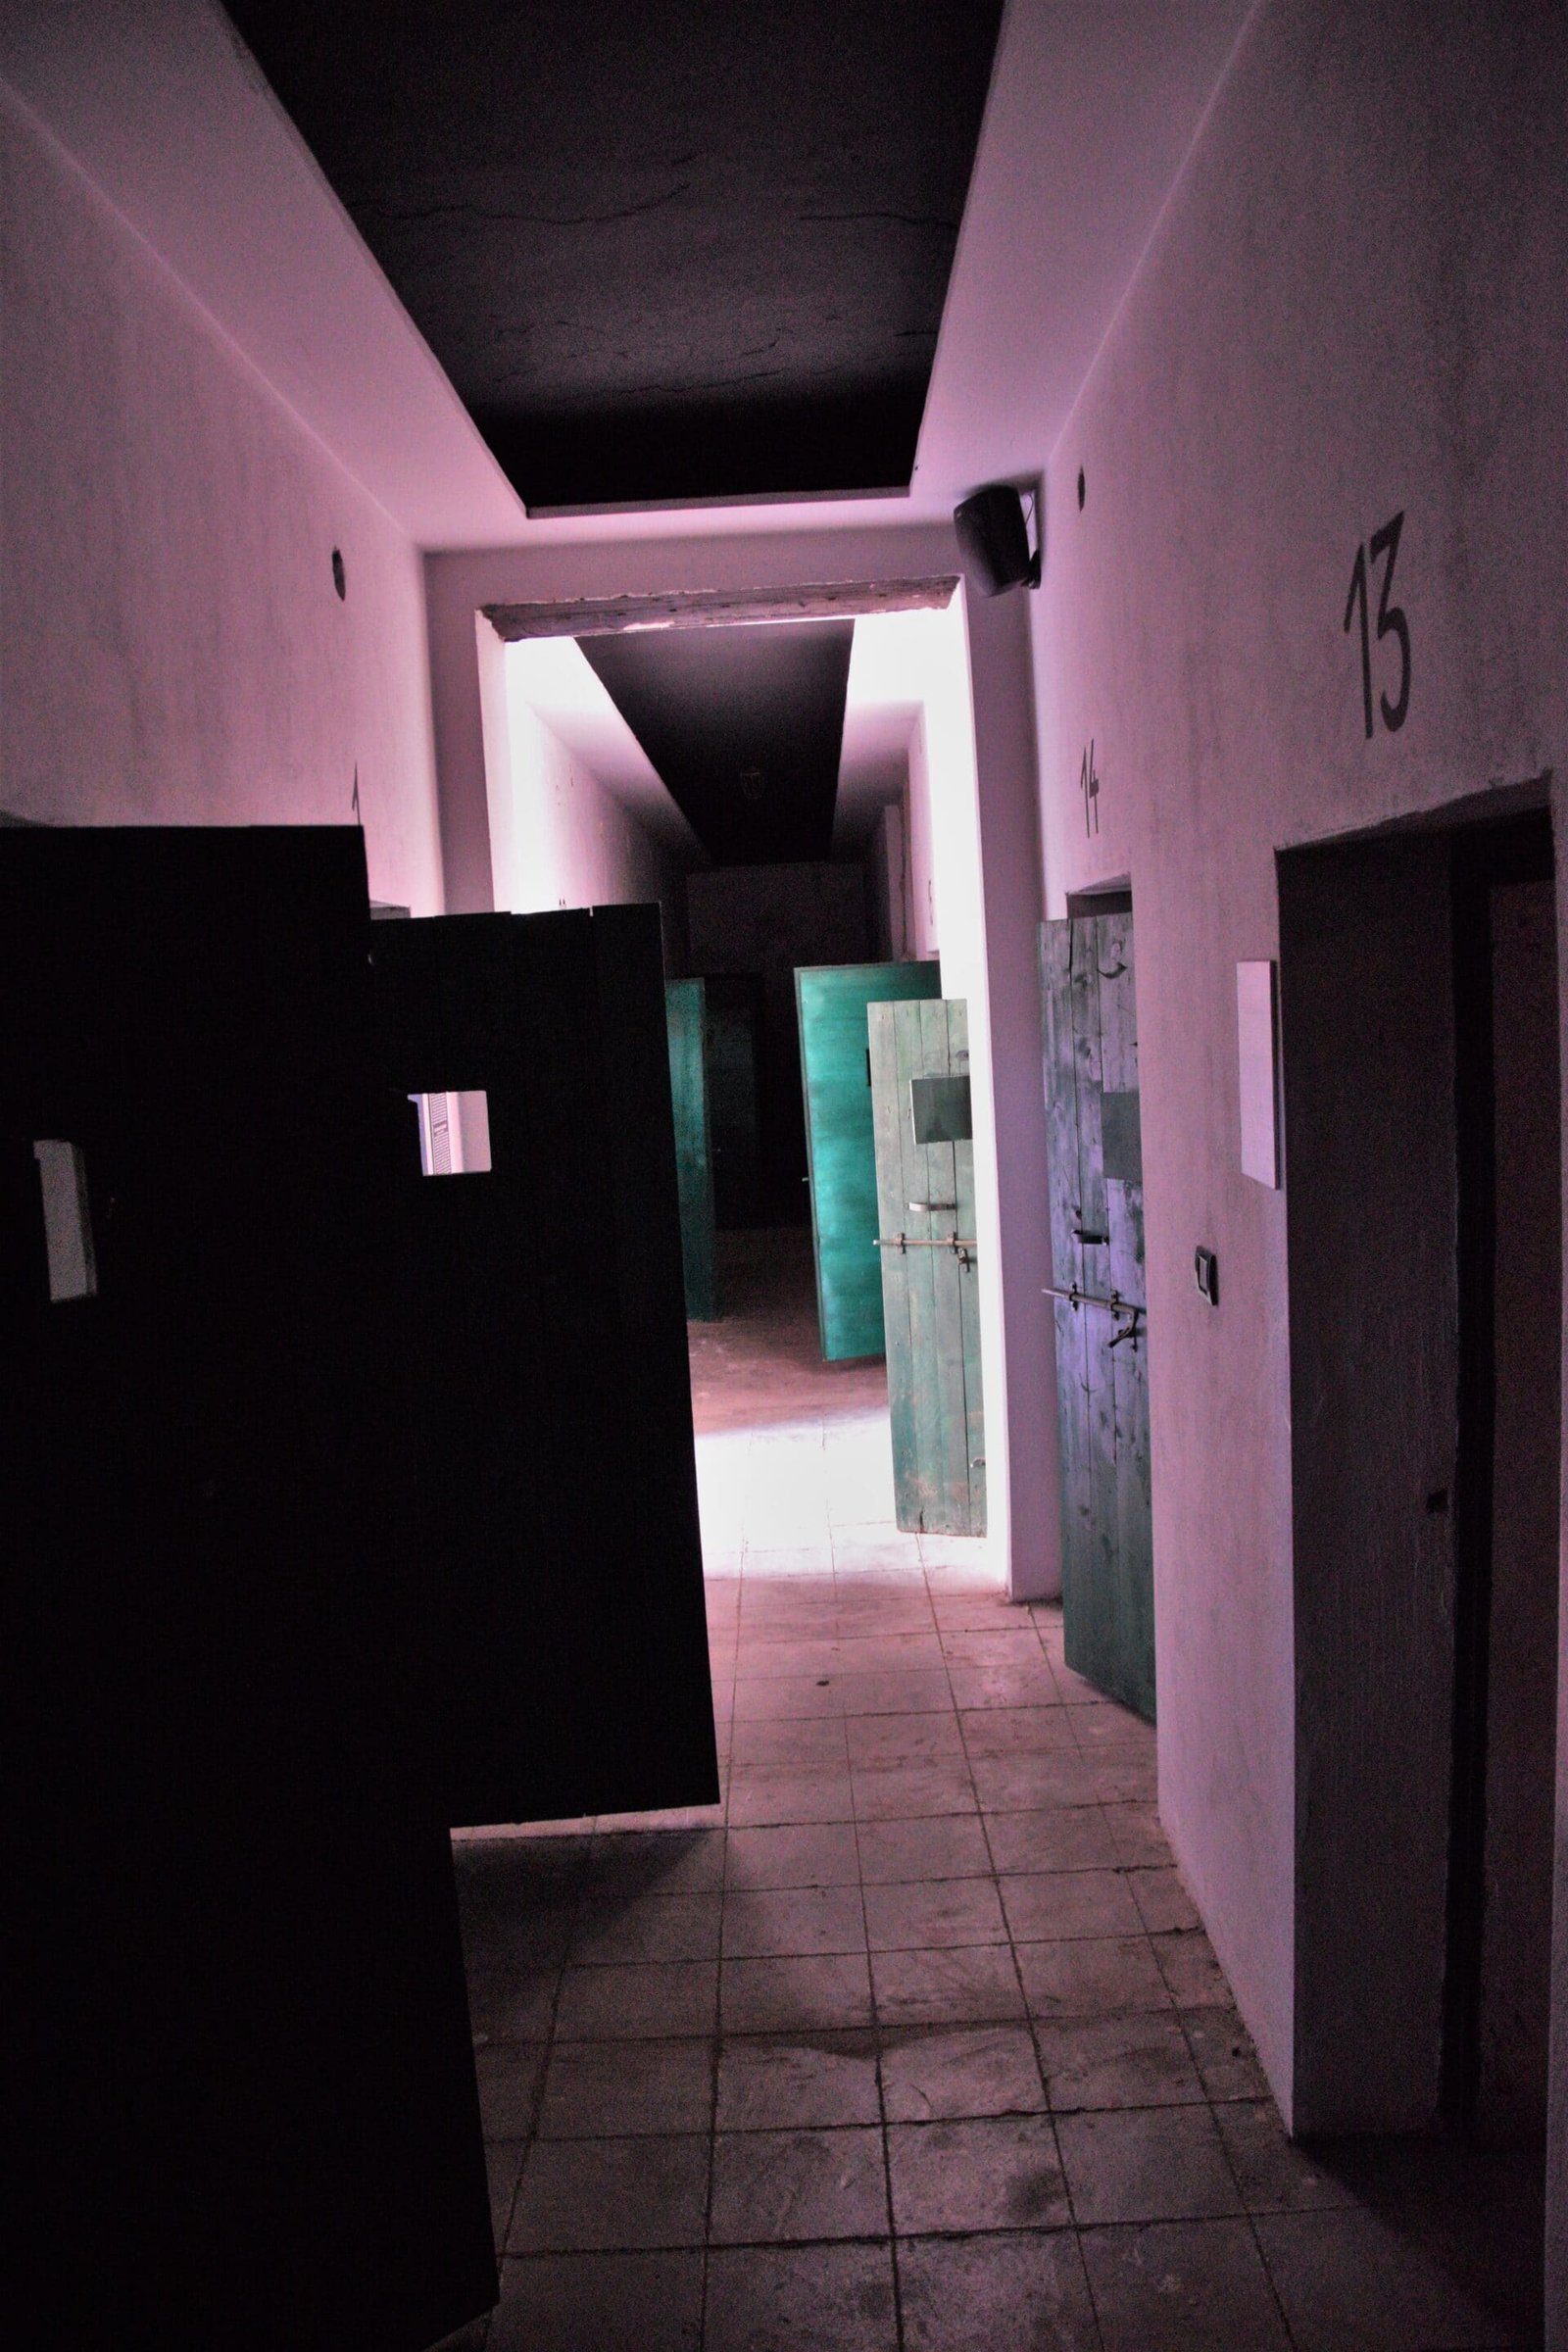 open cell doors in a hallway of a former prison